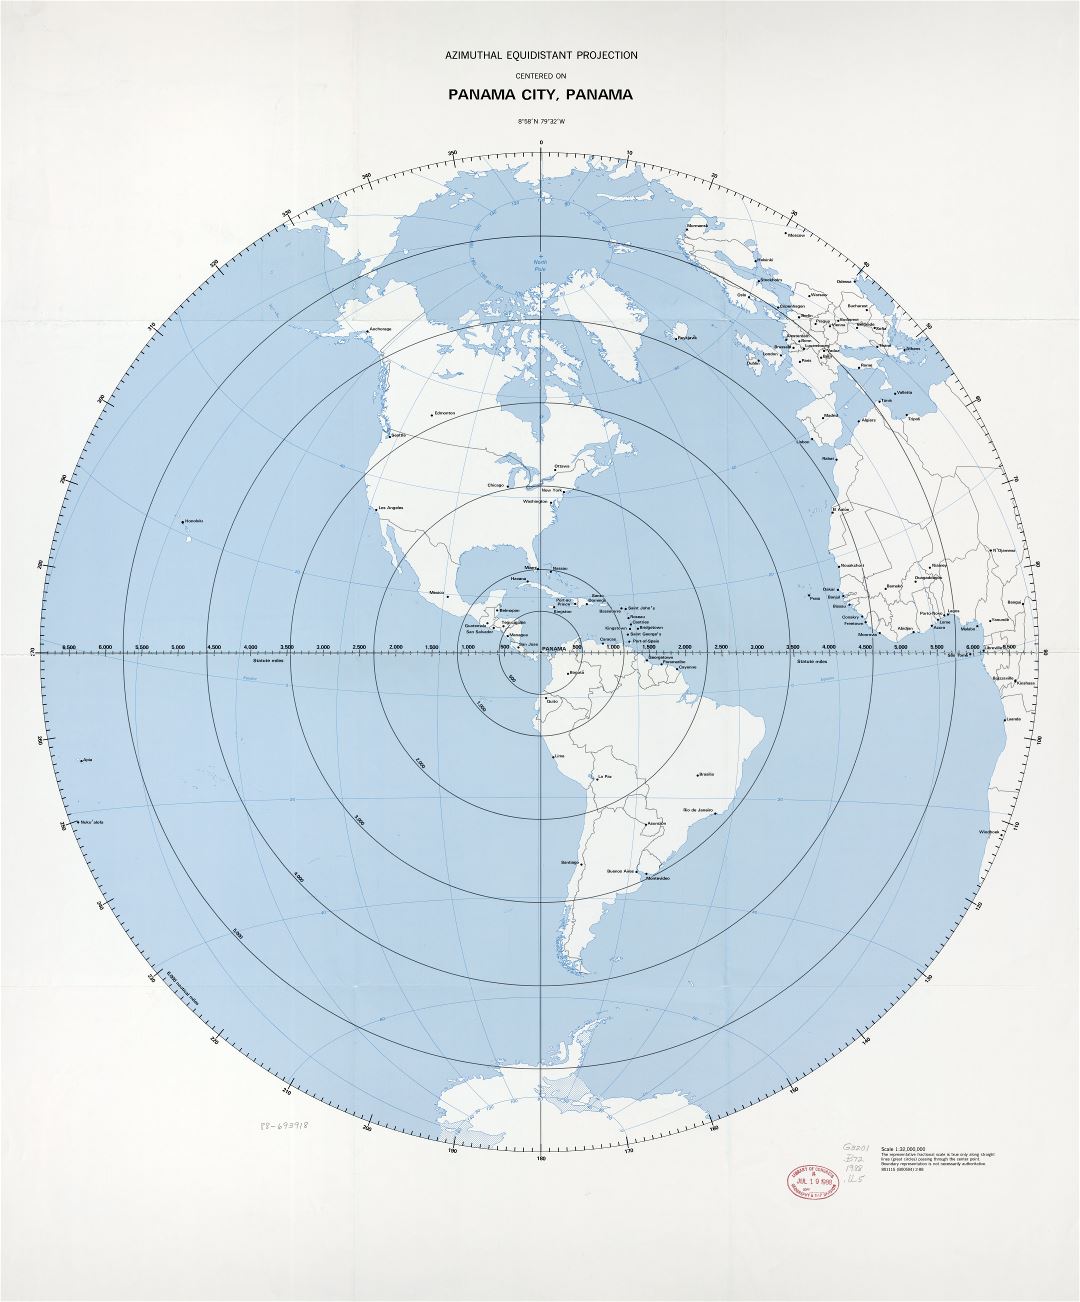 Large scale detailed azimuthal equidistant projection map centered on Panama city, Panama - 1988